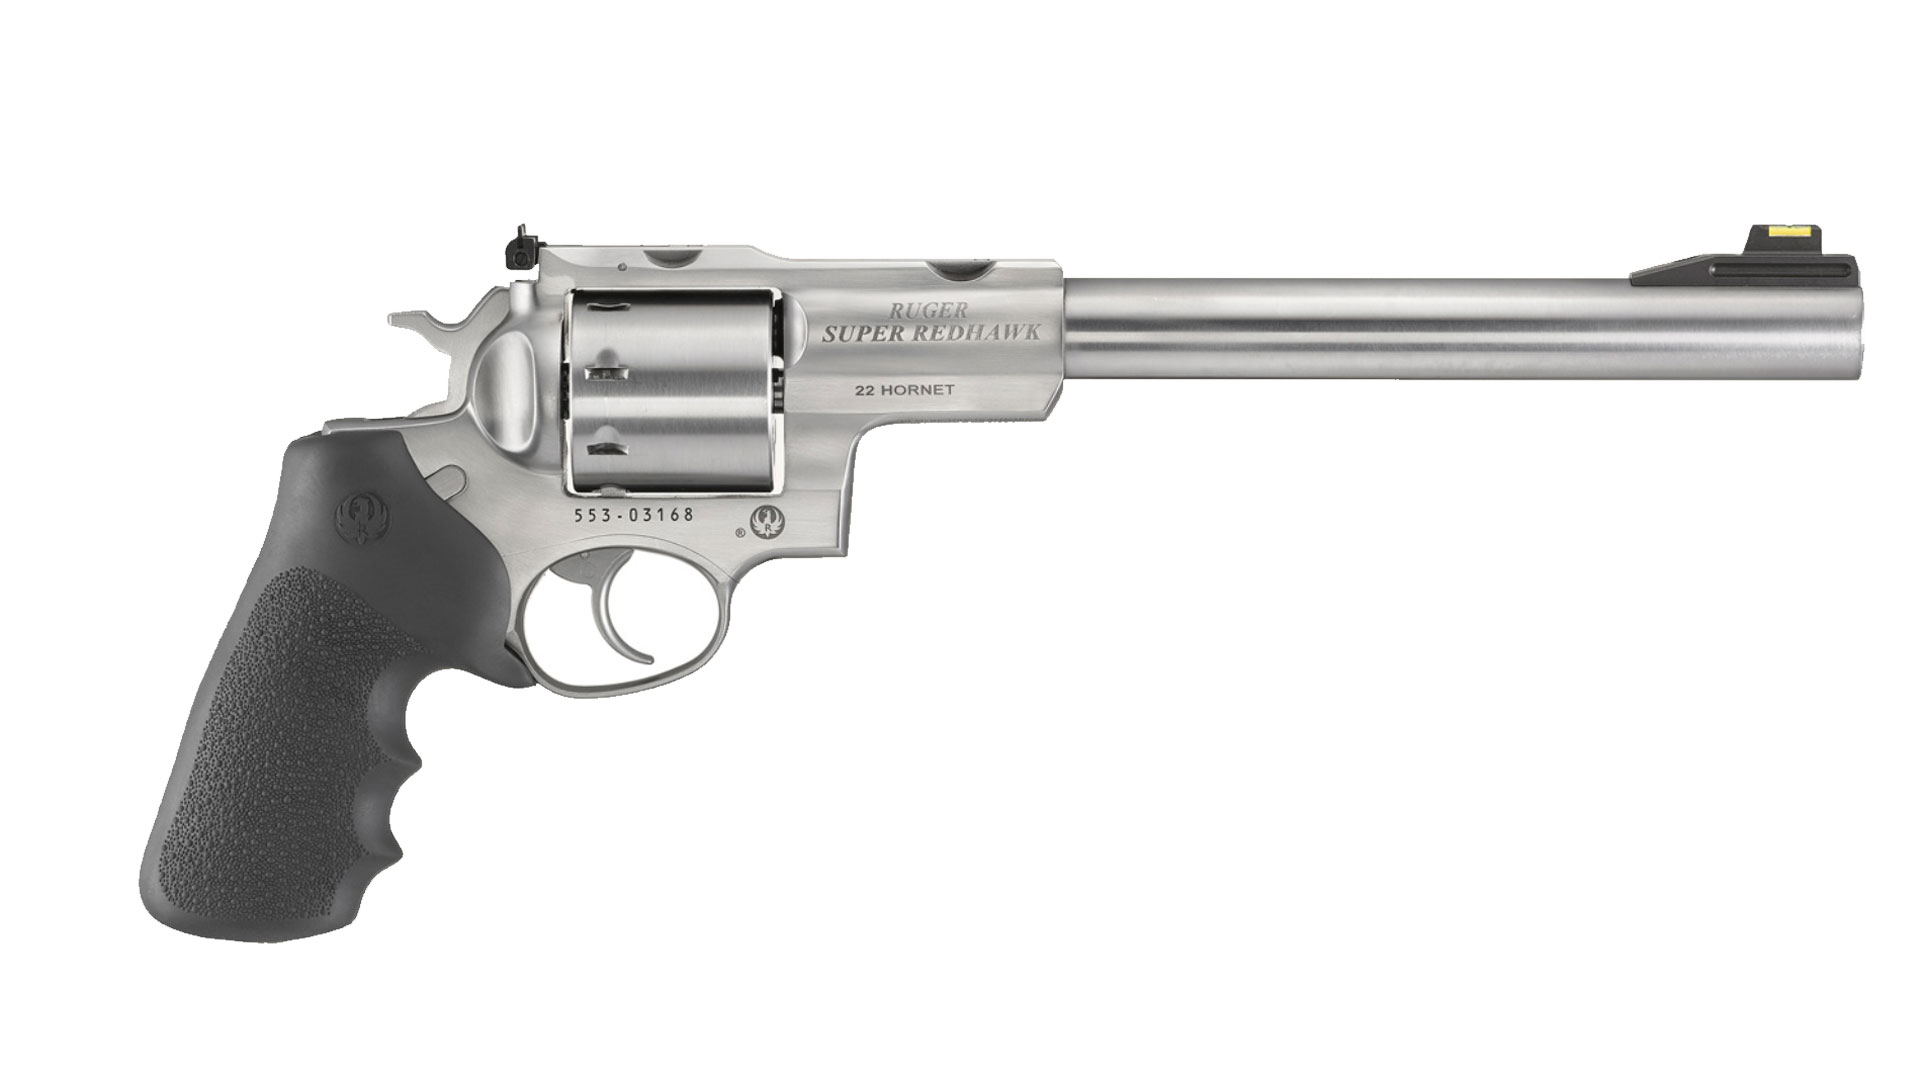 Henry Repeating Arms Unveils New Revolver (Yes, a Revolver!)